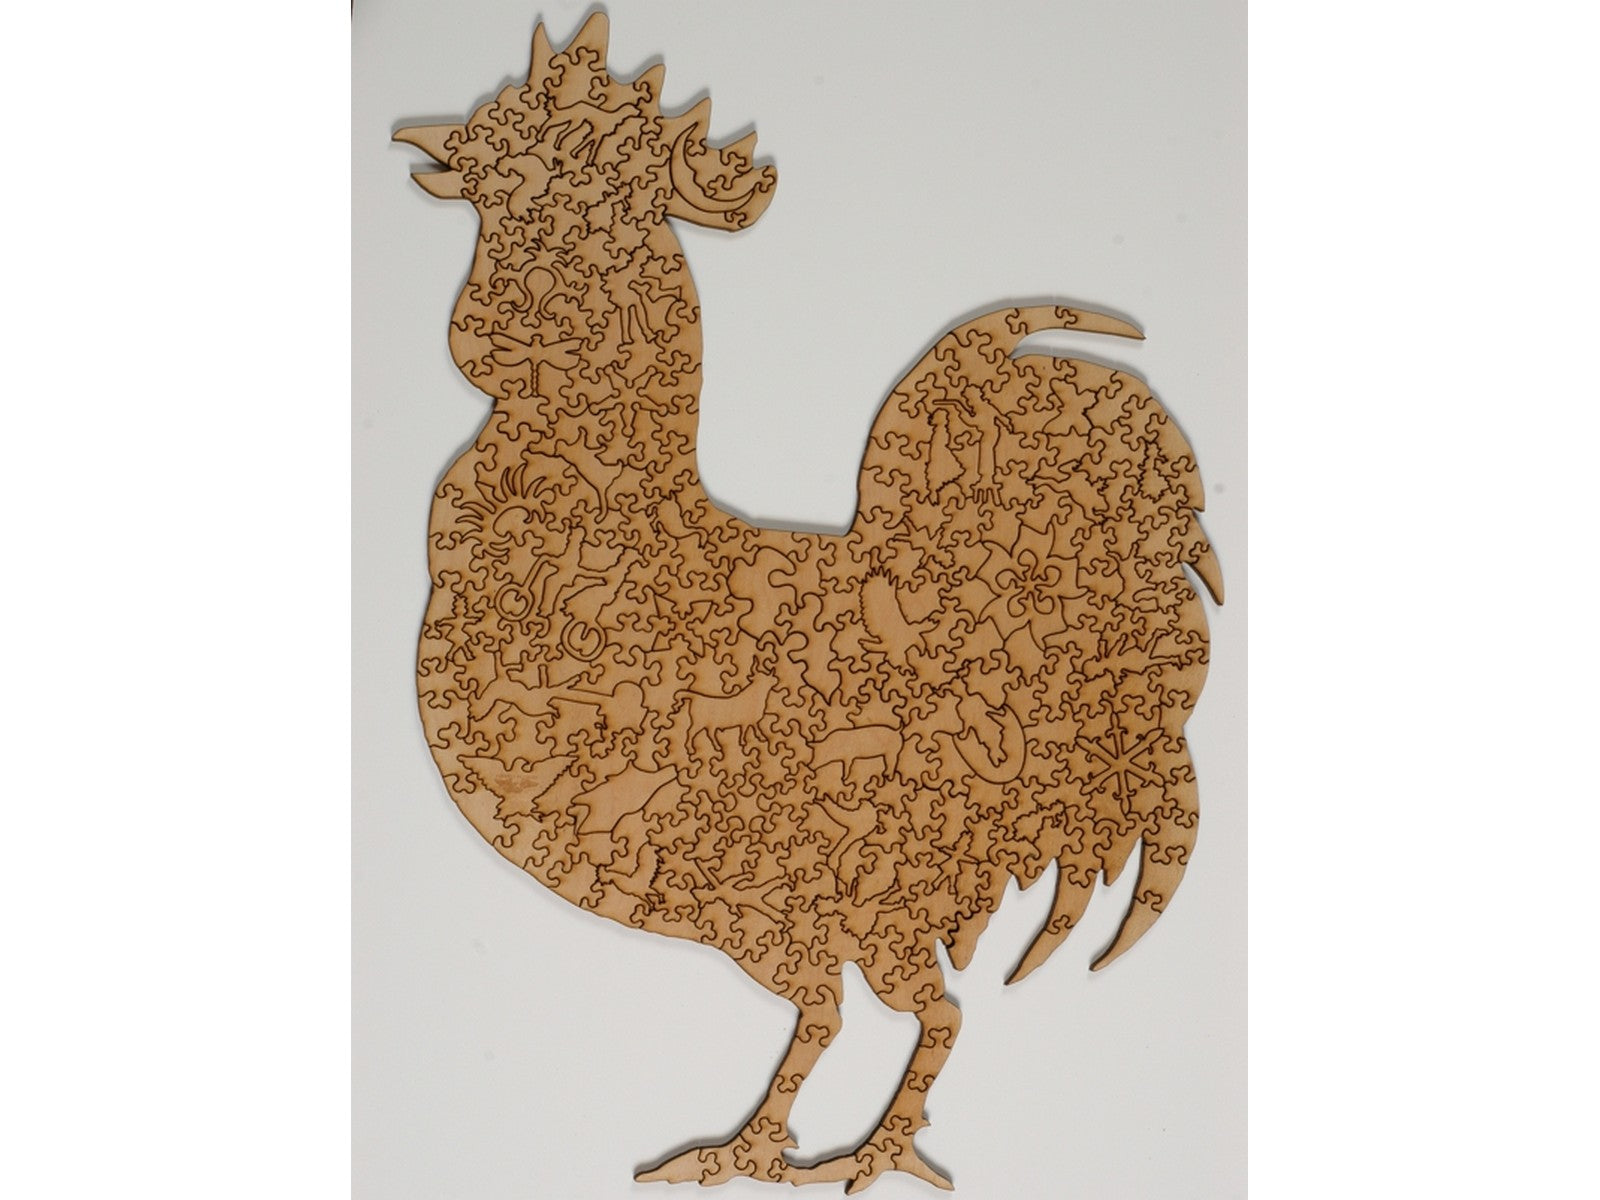 The back of the puzzle, Rooster.